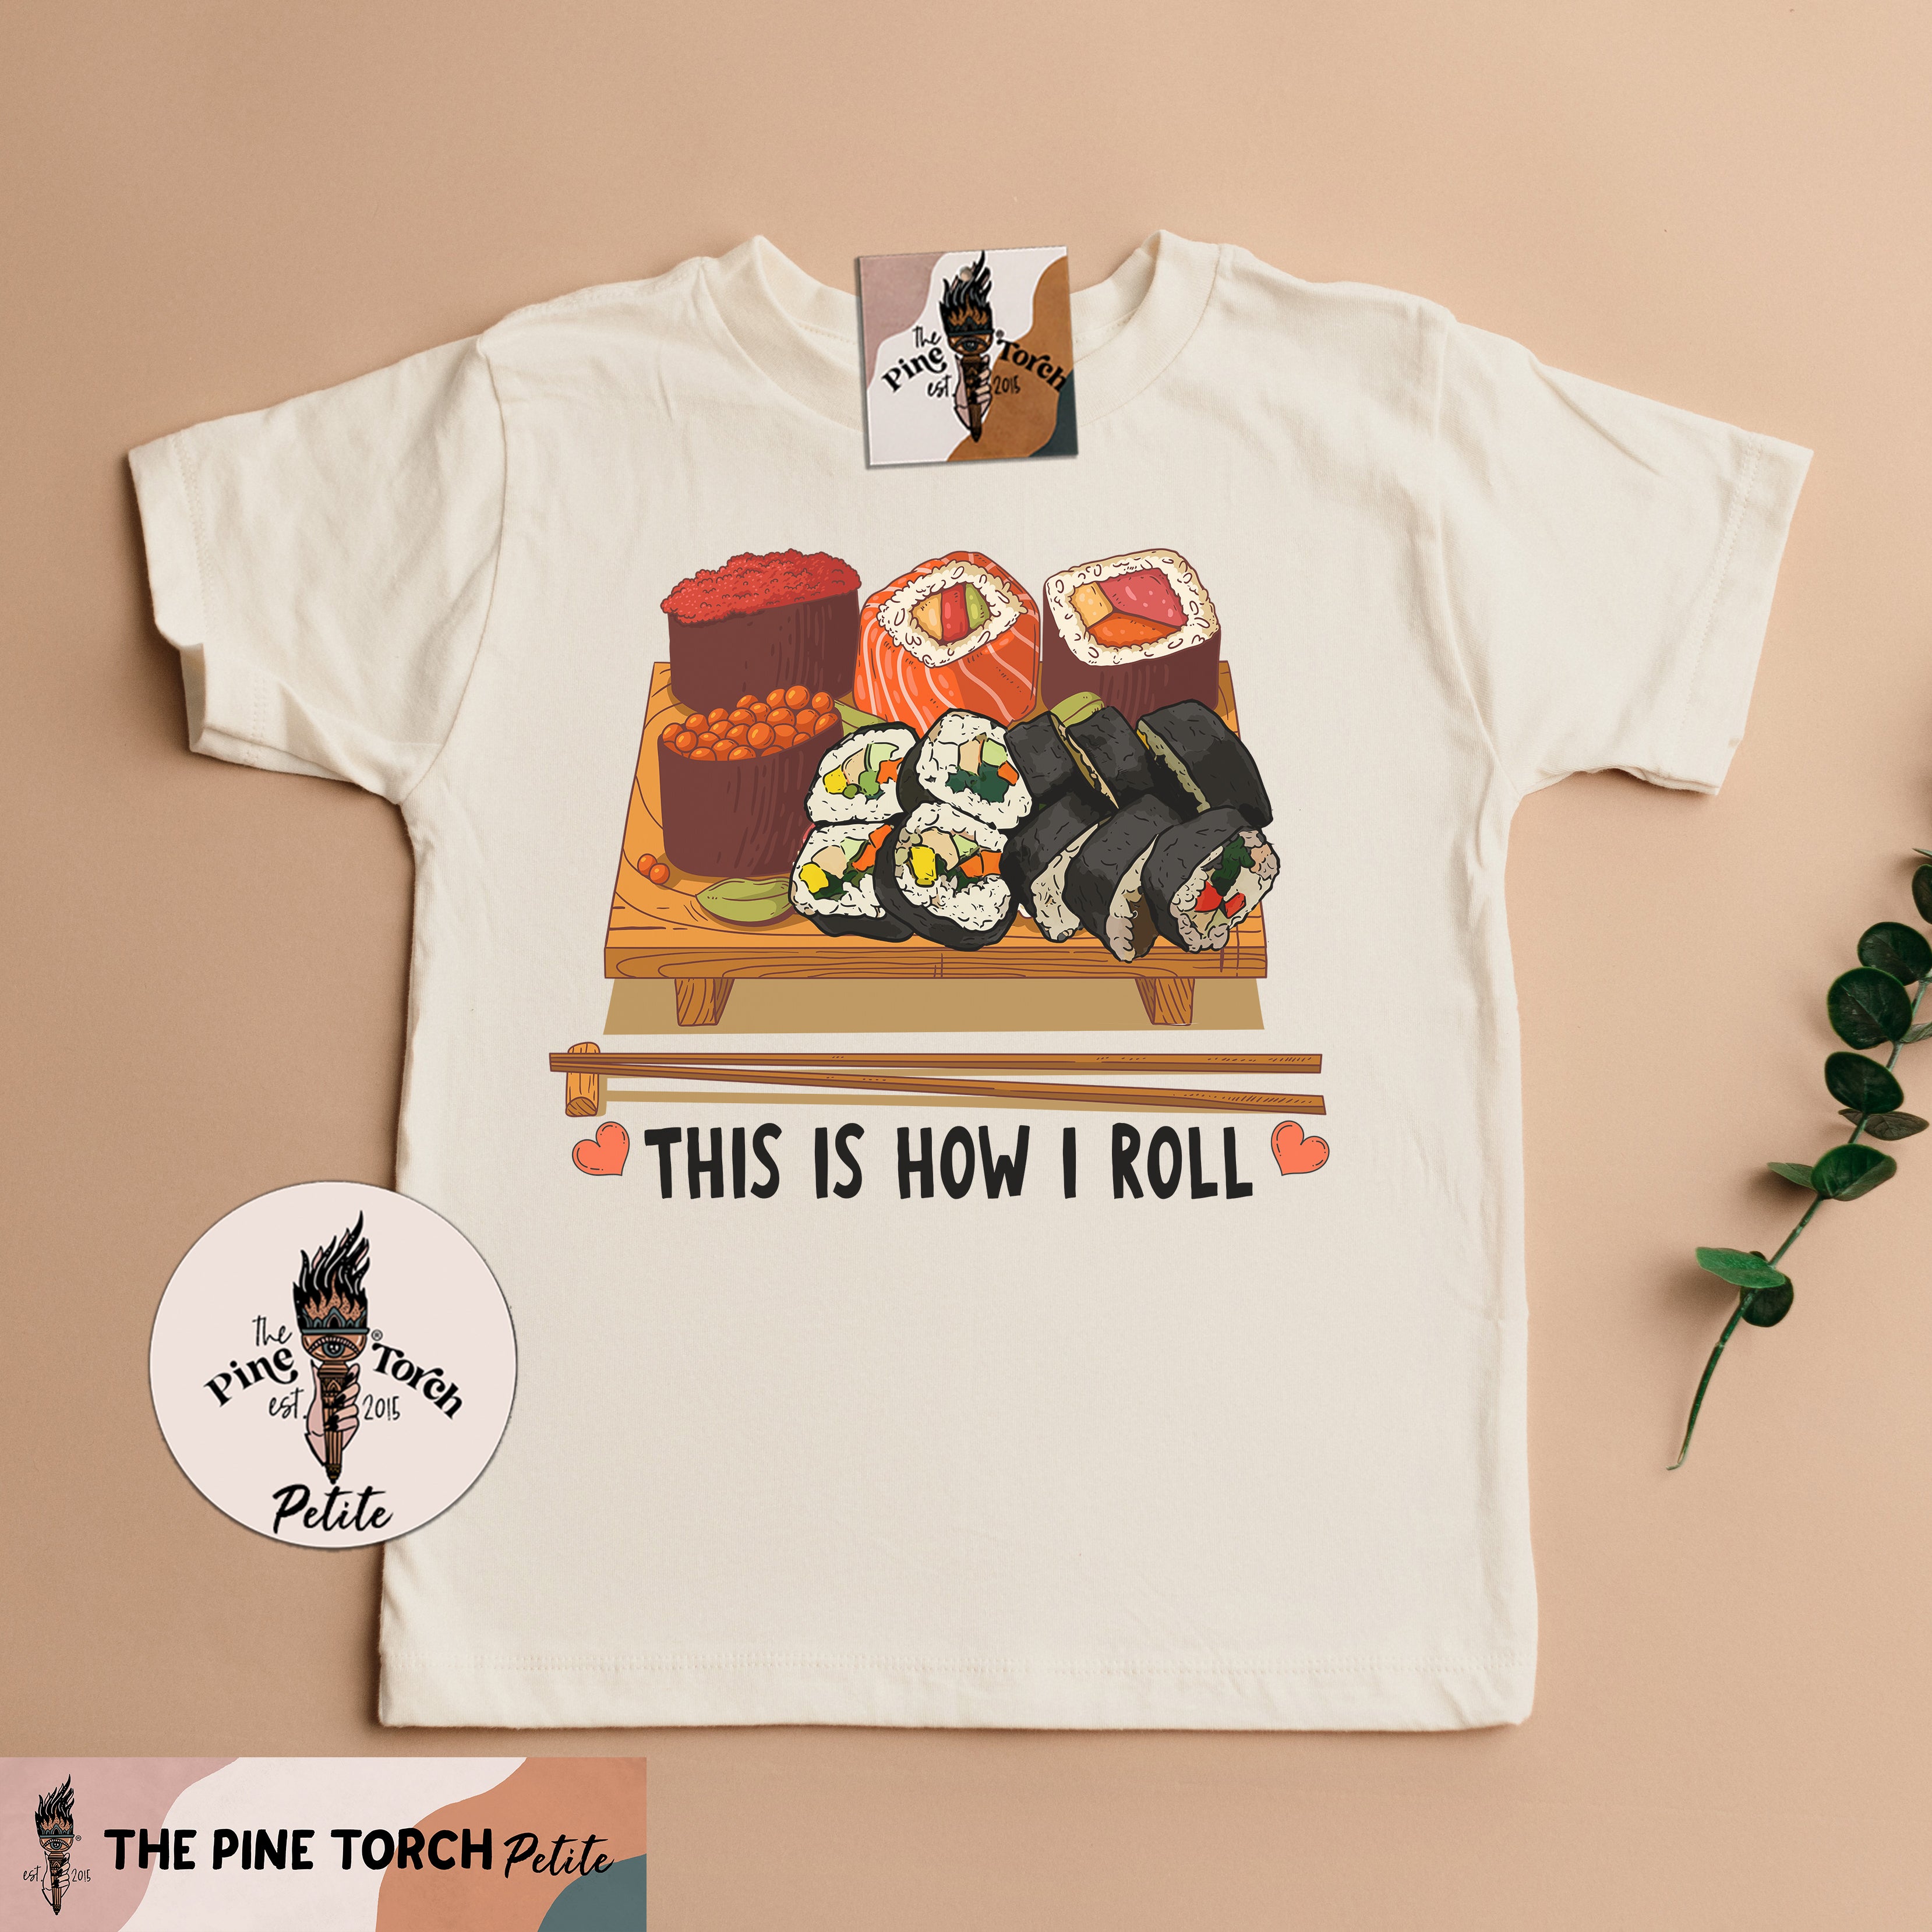 « THIS IS HOW I ROLL » BODYSUIT